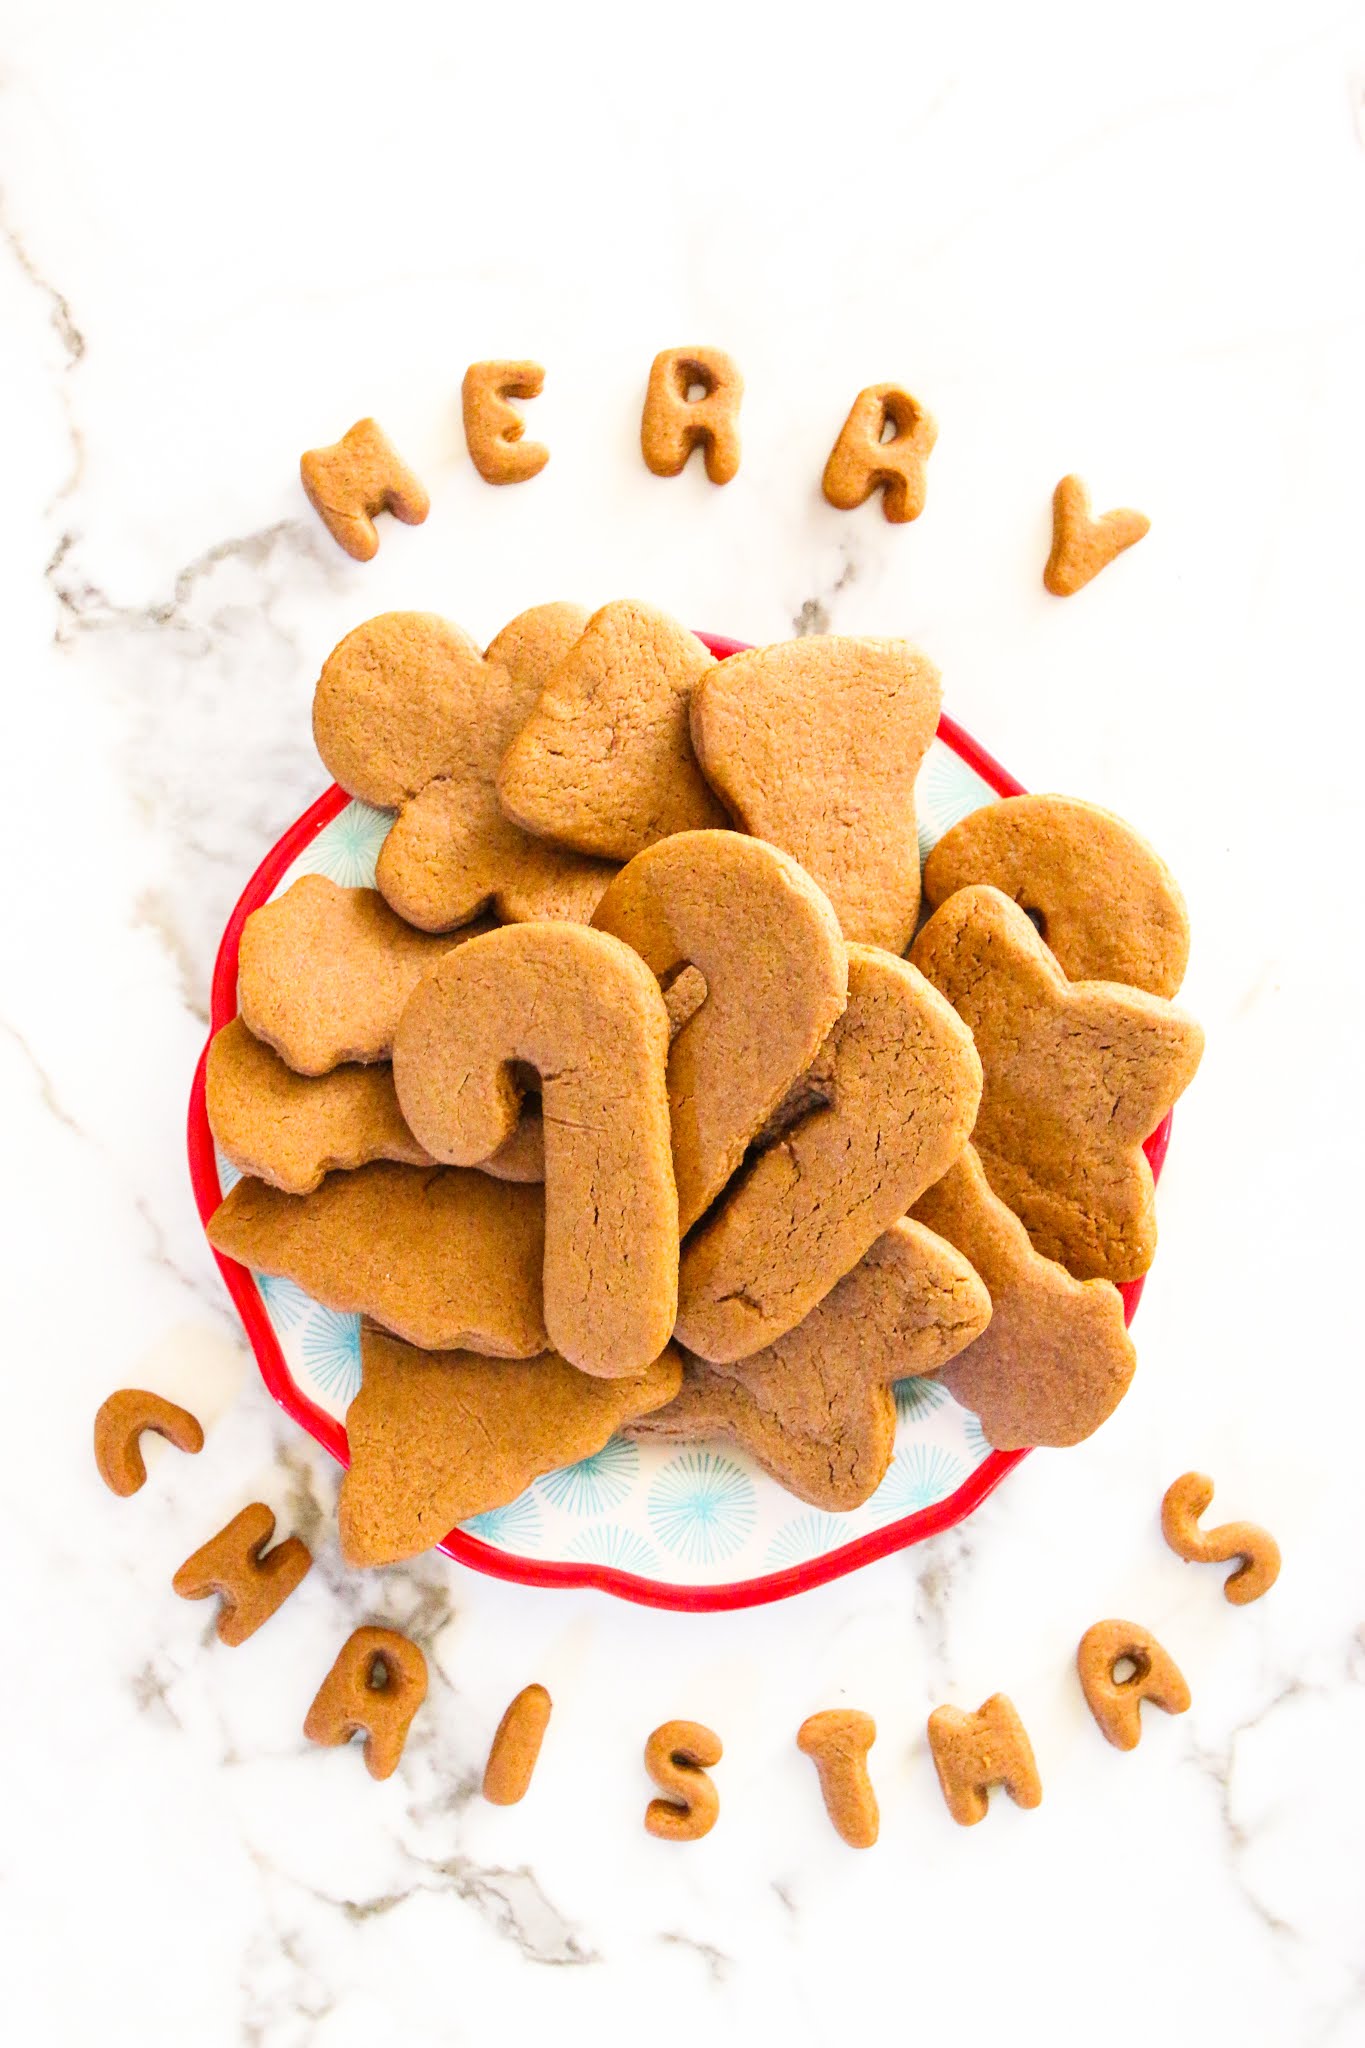 Super easy gingerbread cookies. Easy gingerbread cookies without molasses. Soft gingerbread cookies recipe. Gingerbread cookies Allrecipes. Classic gingerbread cookies. Gingerbread man recipe for preschoolers. Soft gingerbread cookies with icing. Soft gingerbread cutout cookies. #gingerbread #cookies #holiday #baking